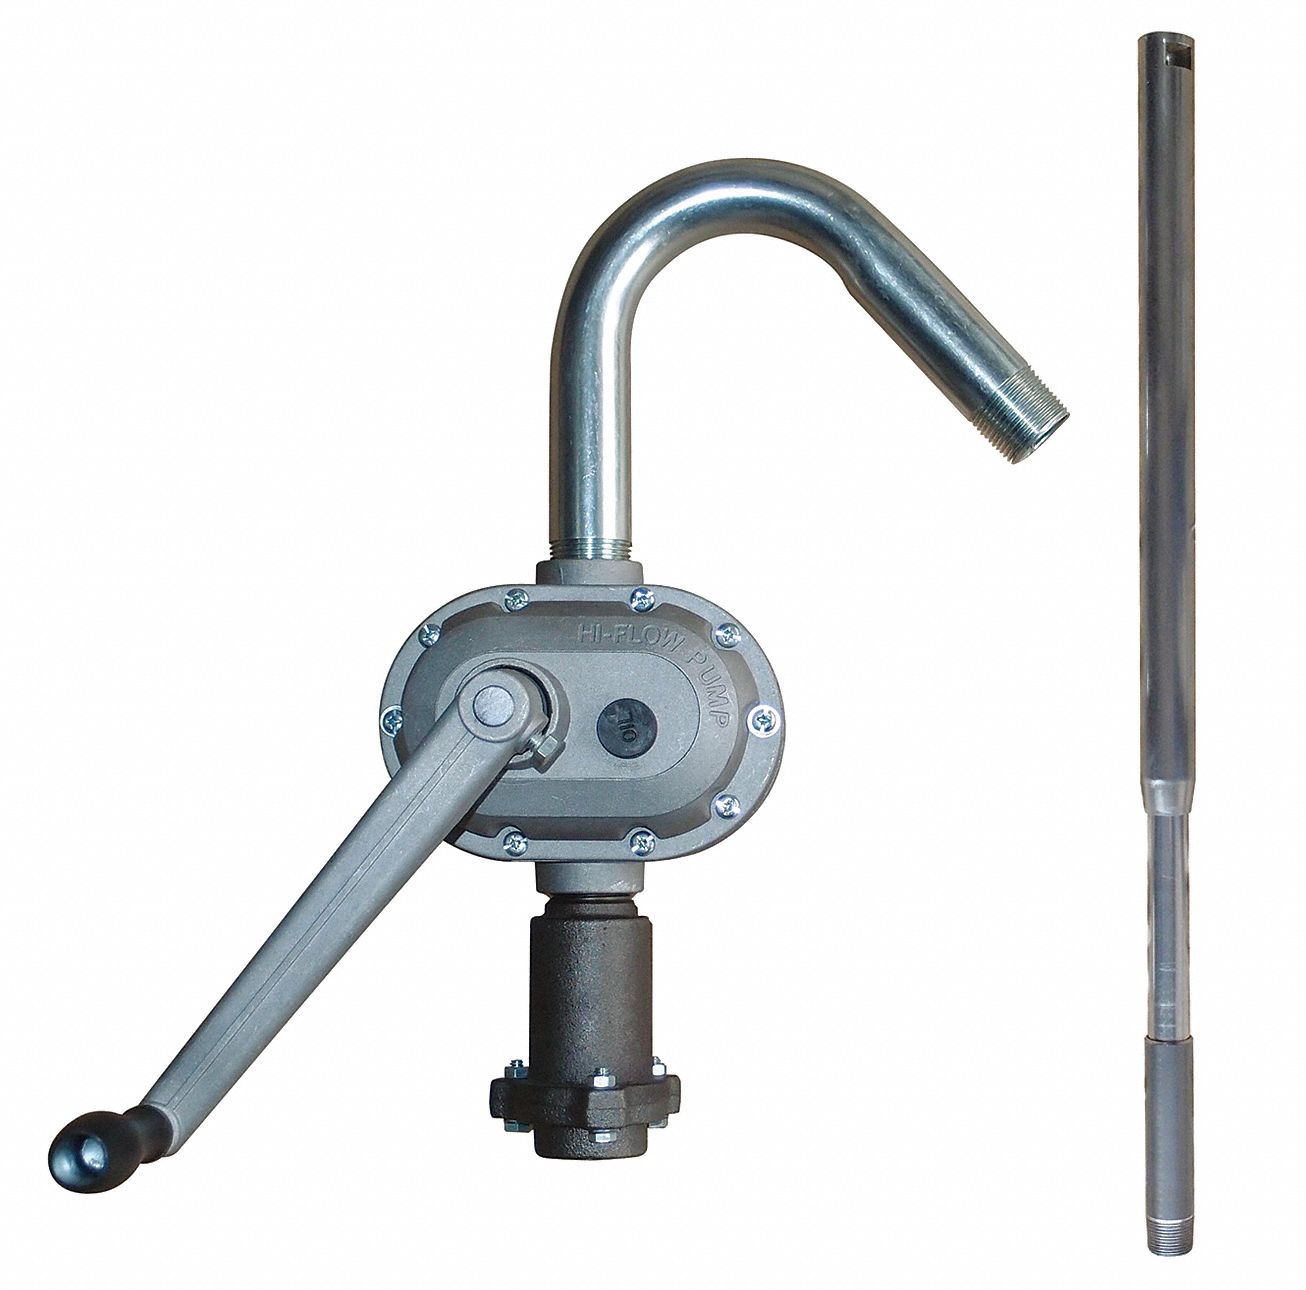 DAYTON Hand Operated Drum Pump, Rotary, Basic Pump with Spout, Container Type Drum - 7P085|7P085 -